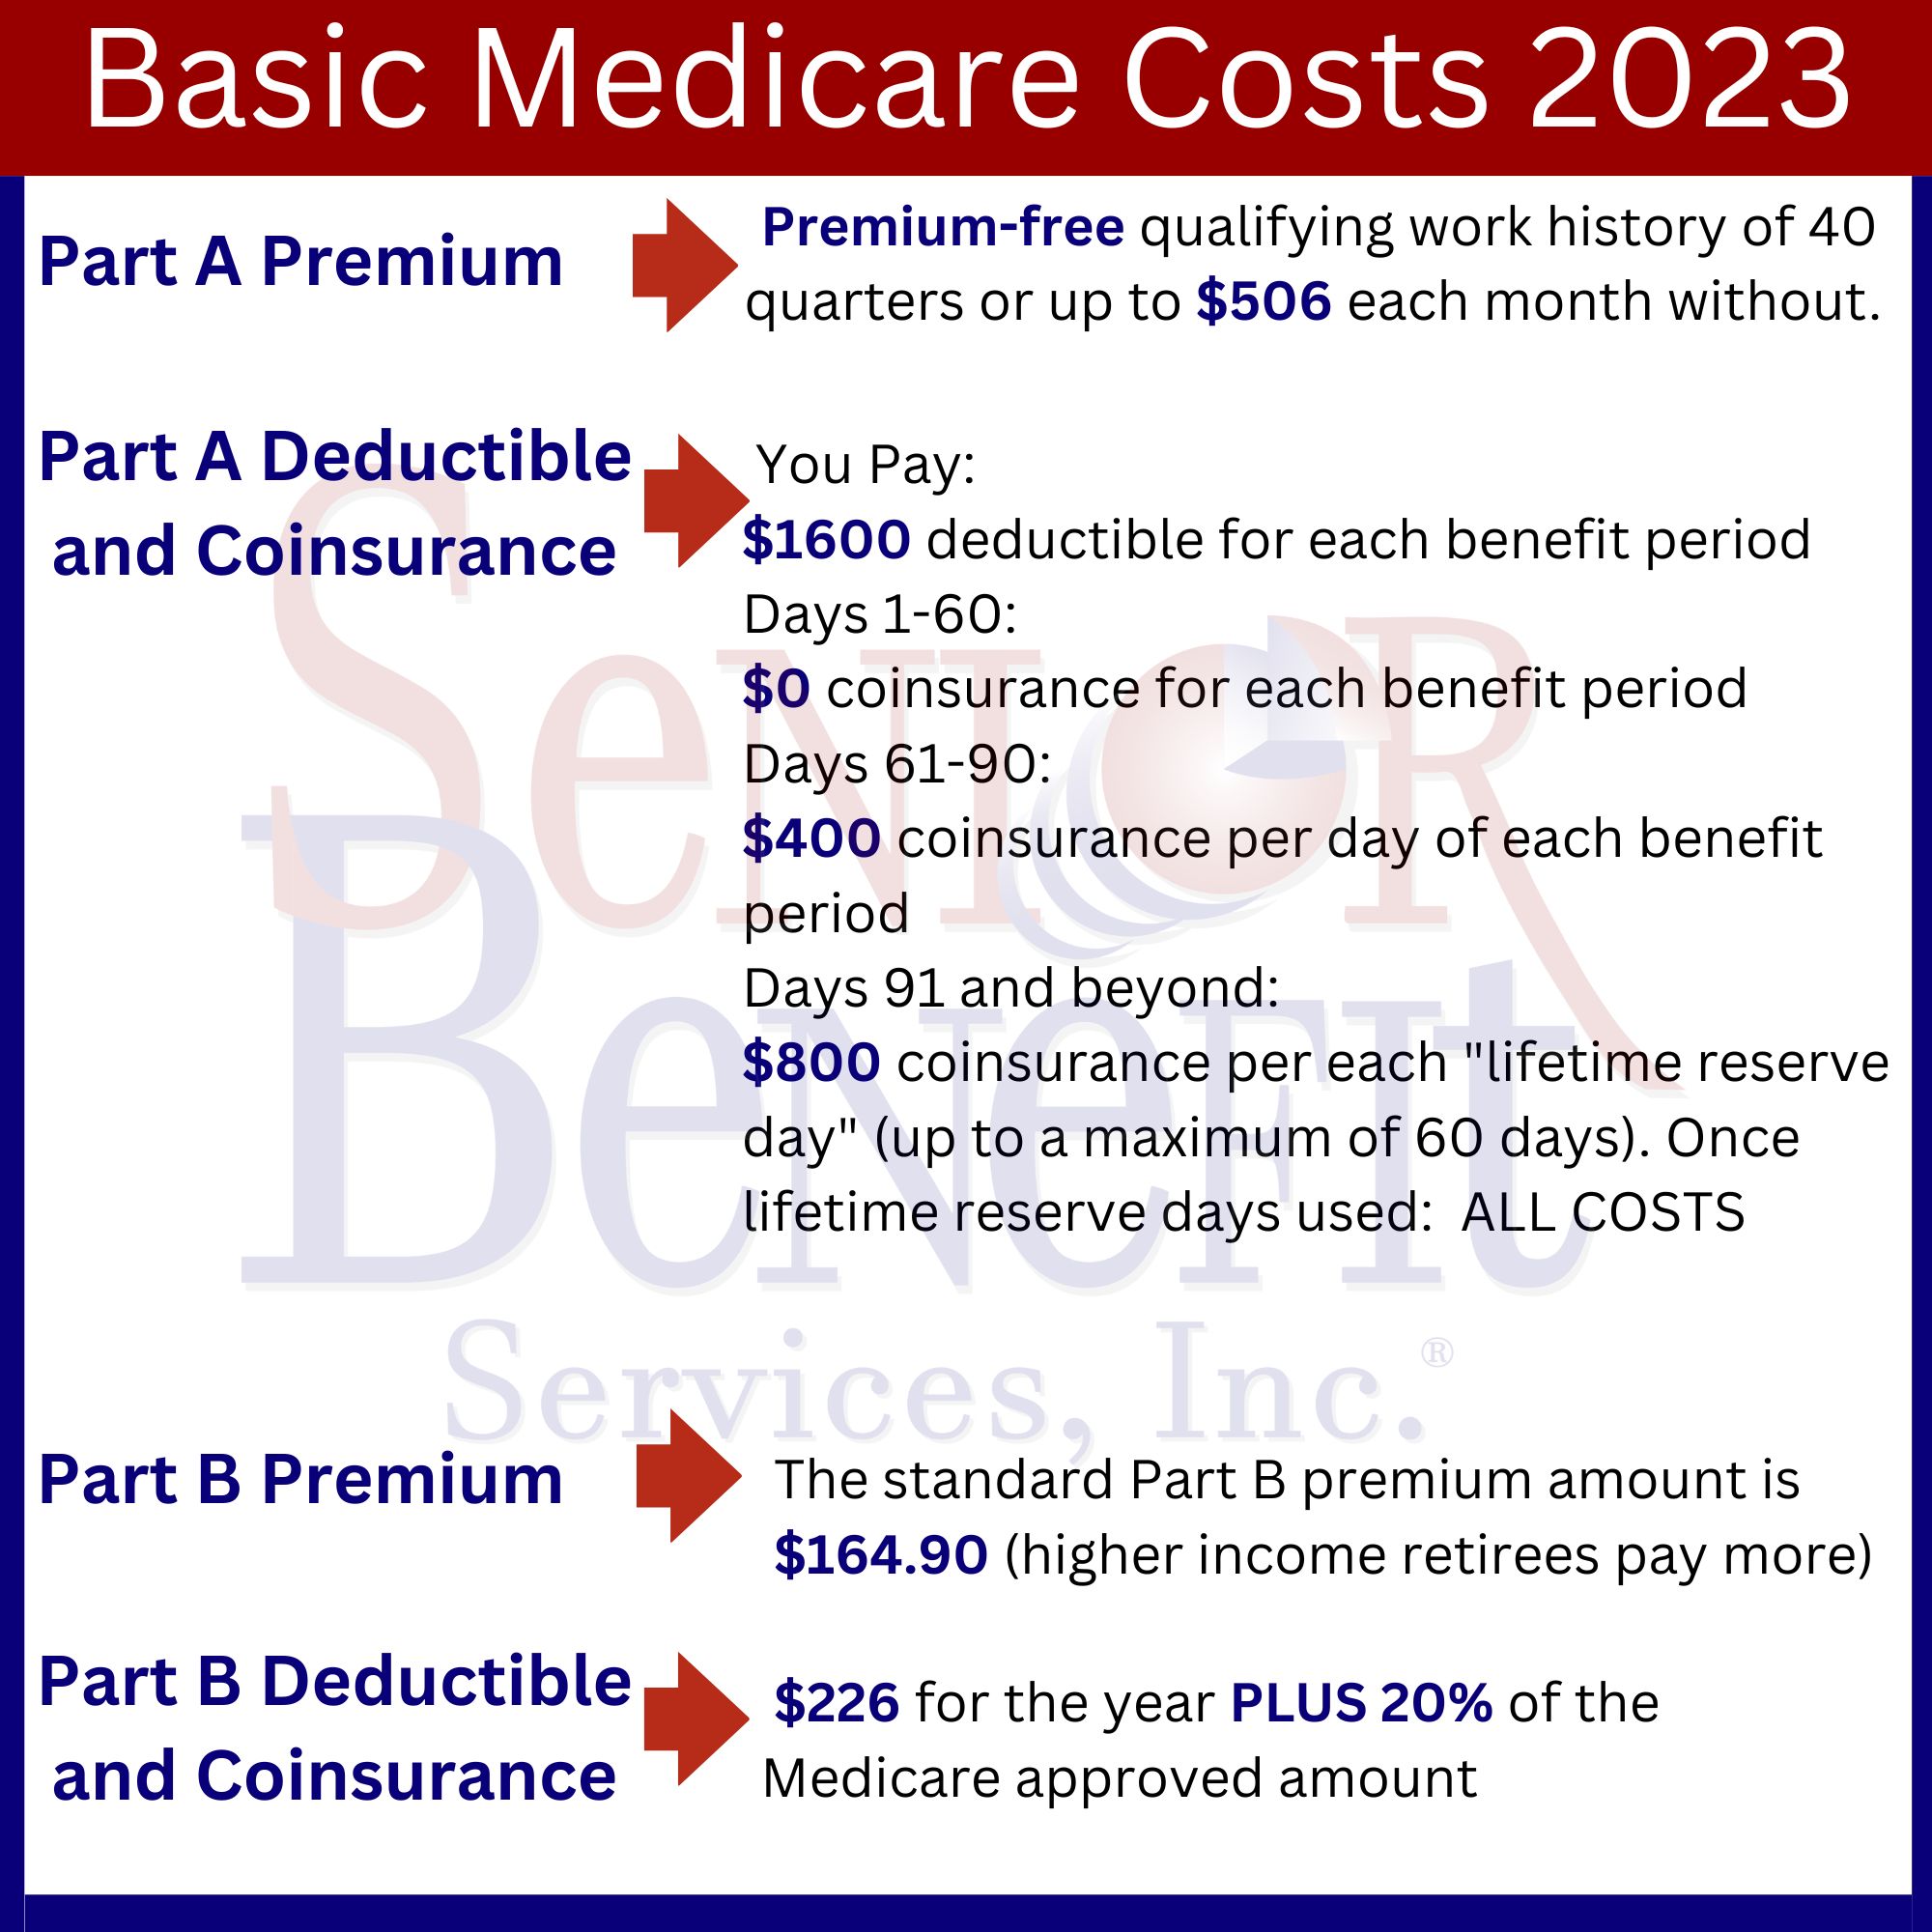 Medicare costs for 2023